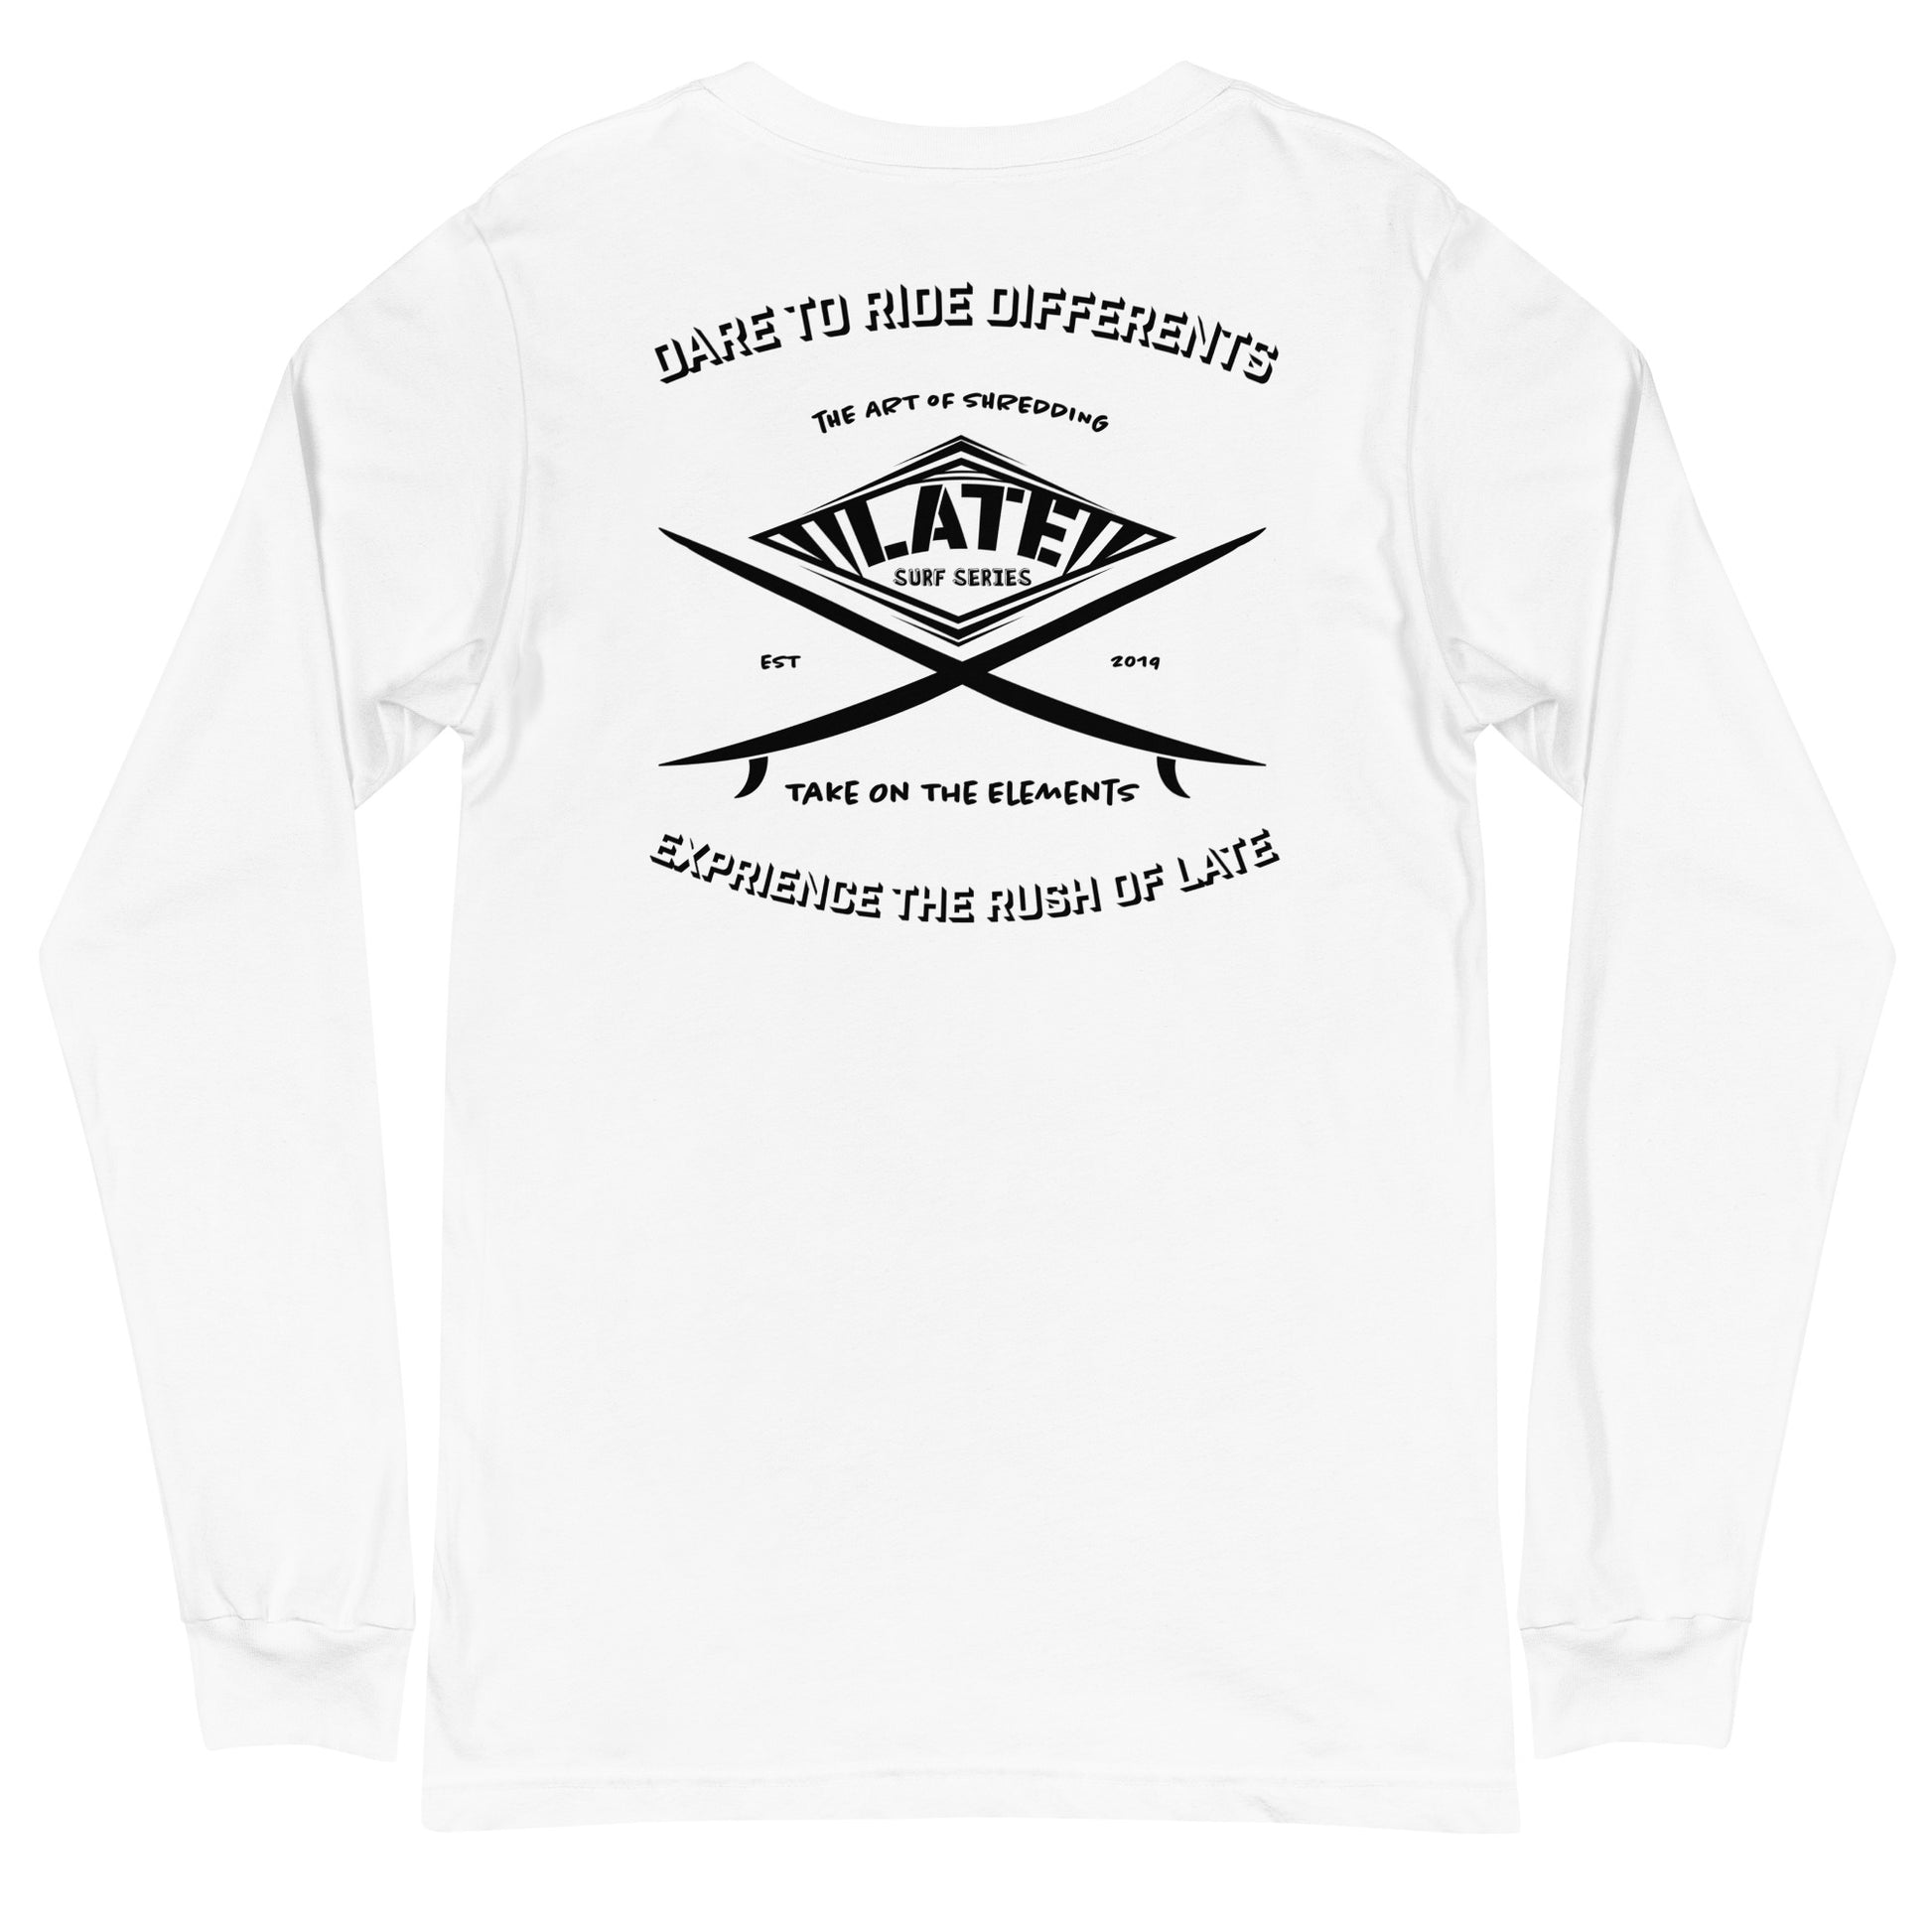 Long Sleeve surf vintage Take On The Elements Logo Late surf series, texte dare to ride differents couleur blanc